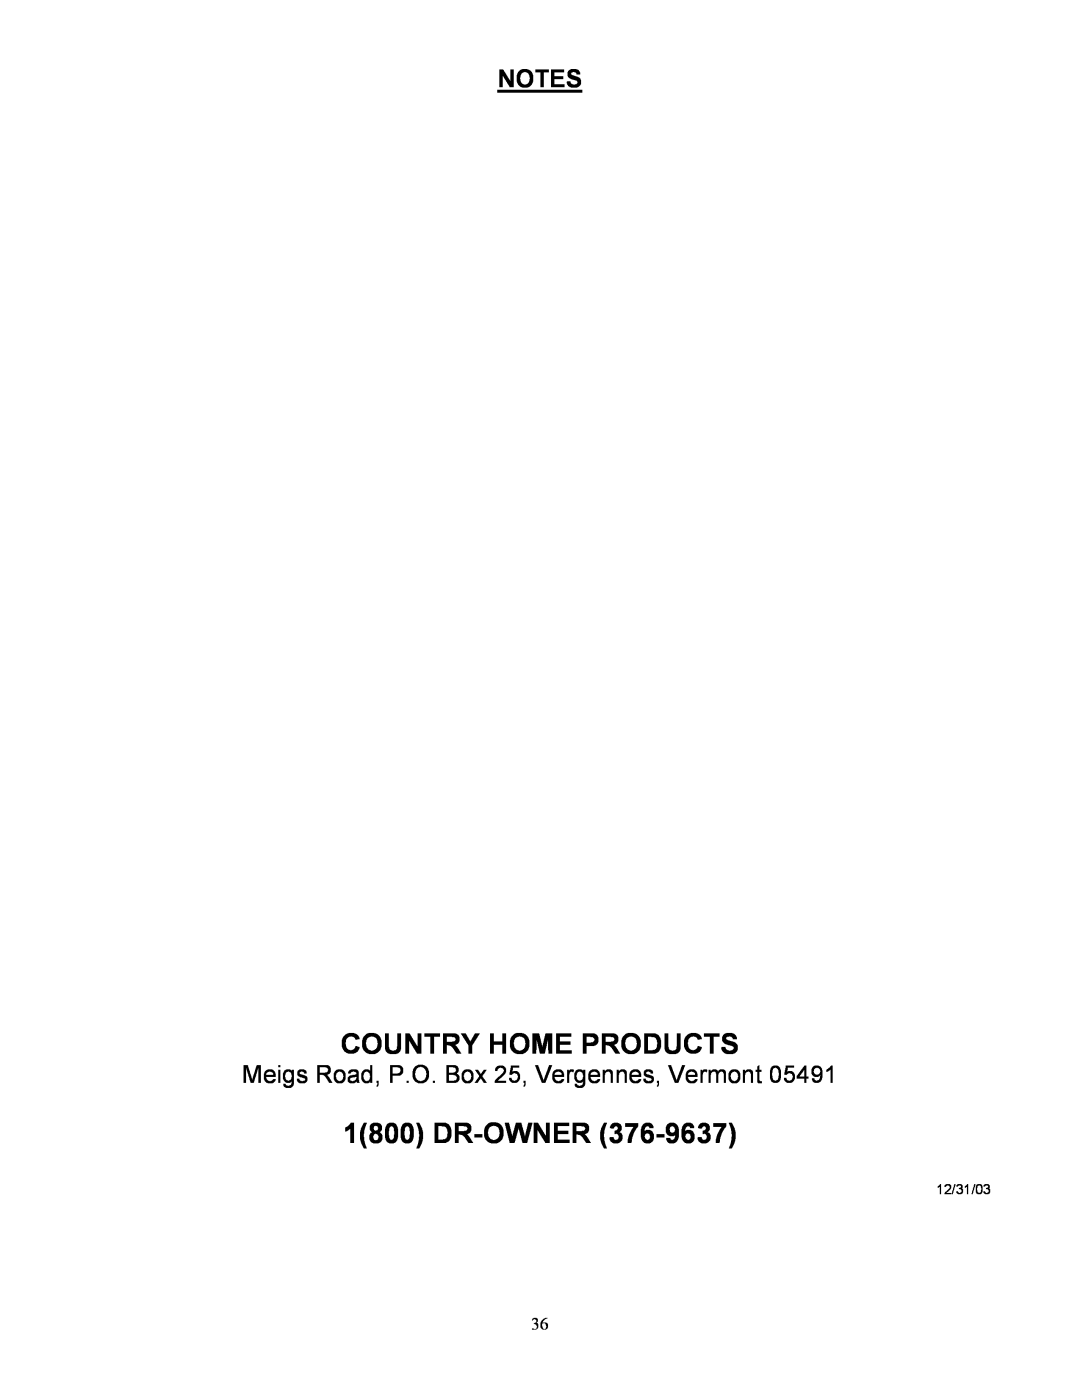 Country Home Products TLC18-CHP Country Home Products, Dr-Owner, Meigs Road, P.O. Box 25, Vergennes, Vermont 